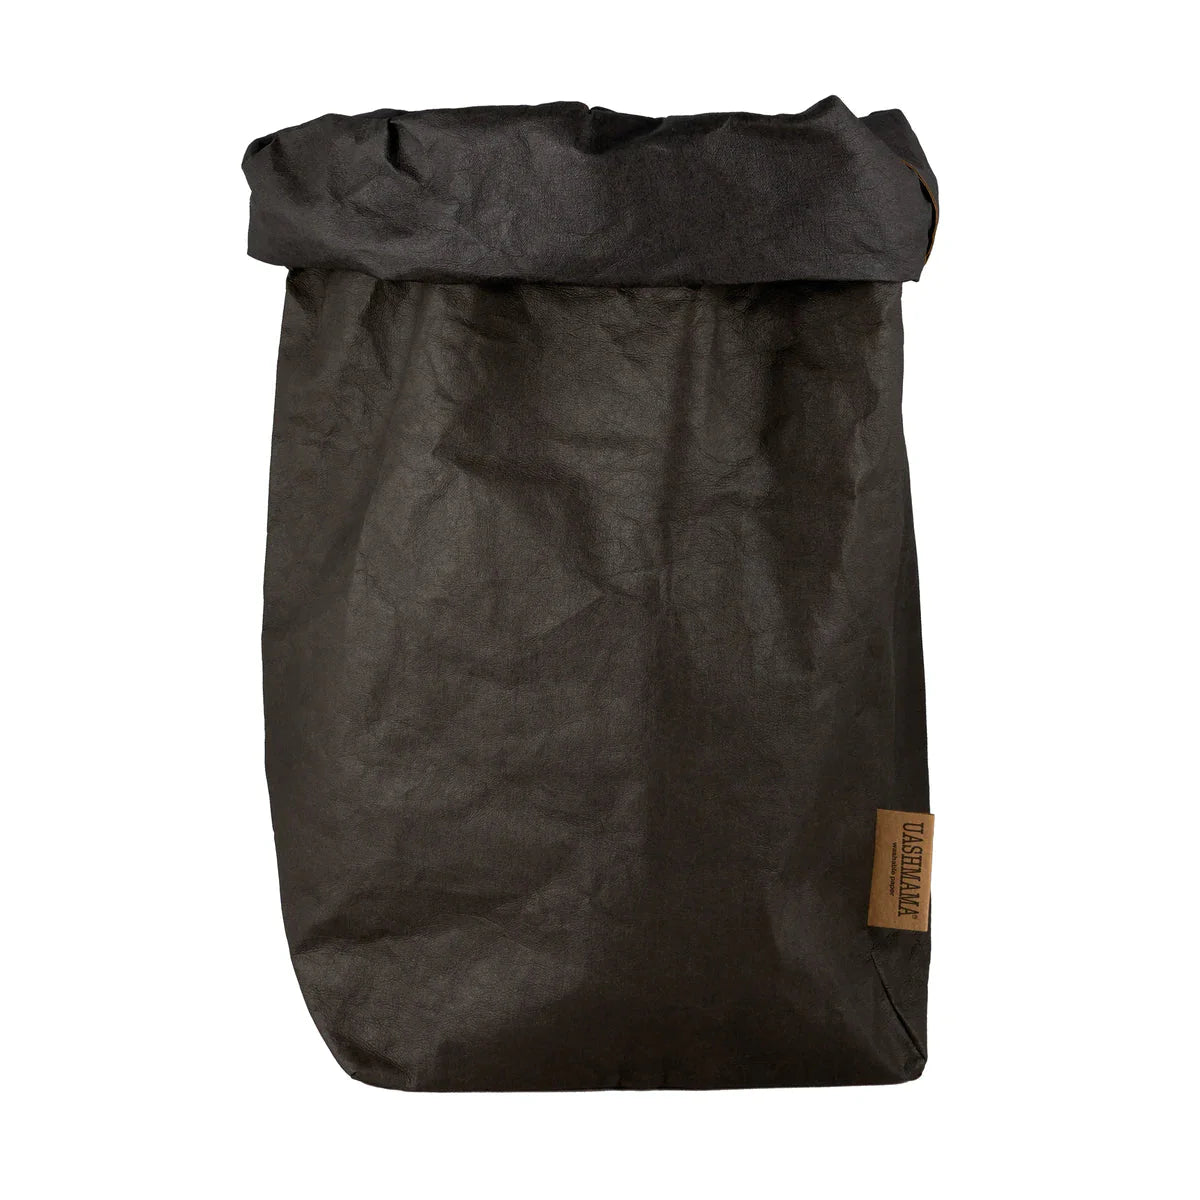 A washable paper bag is shown. The bag is rolled down at the top and features a UASHMAMA logo label on the bottom left corner. The bag pictured is the extra extra large size in brown.